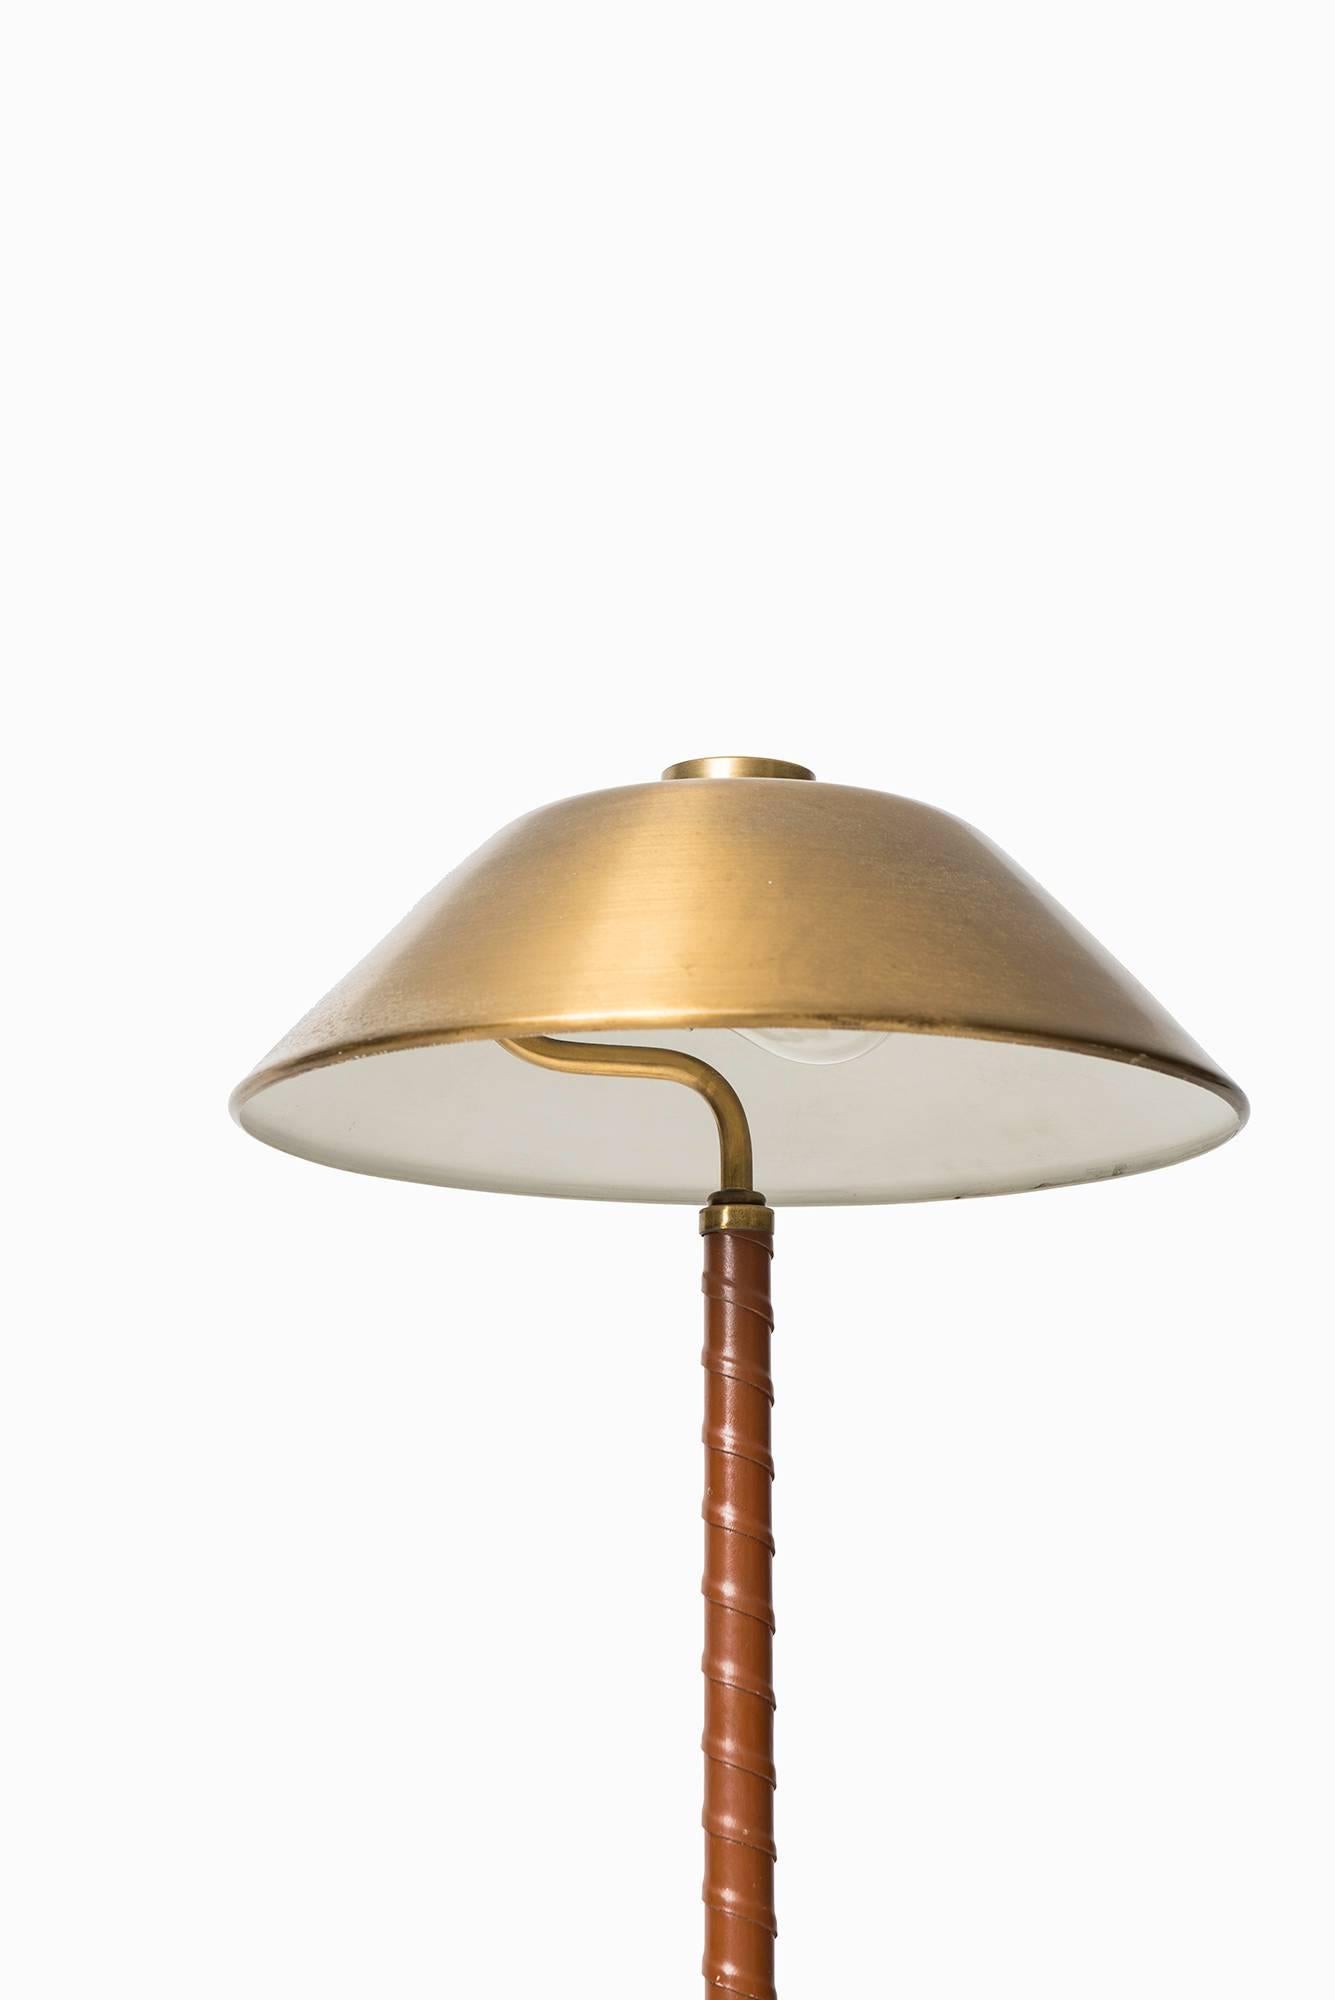 Table lamp in brass and leather. Produced by Einar Bäckström in Sweden.